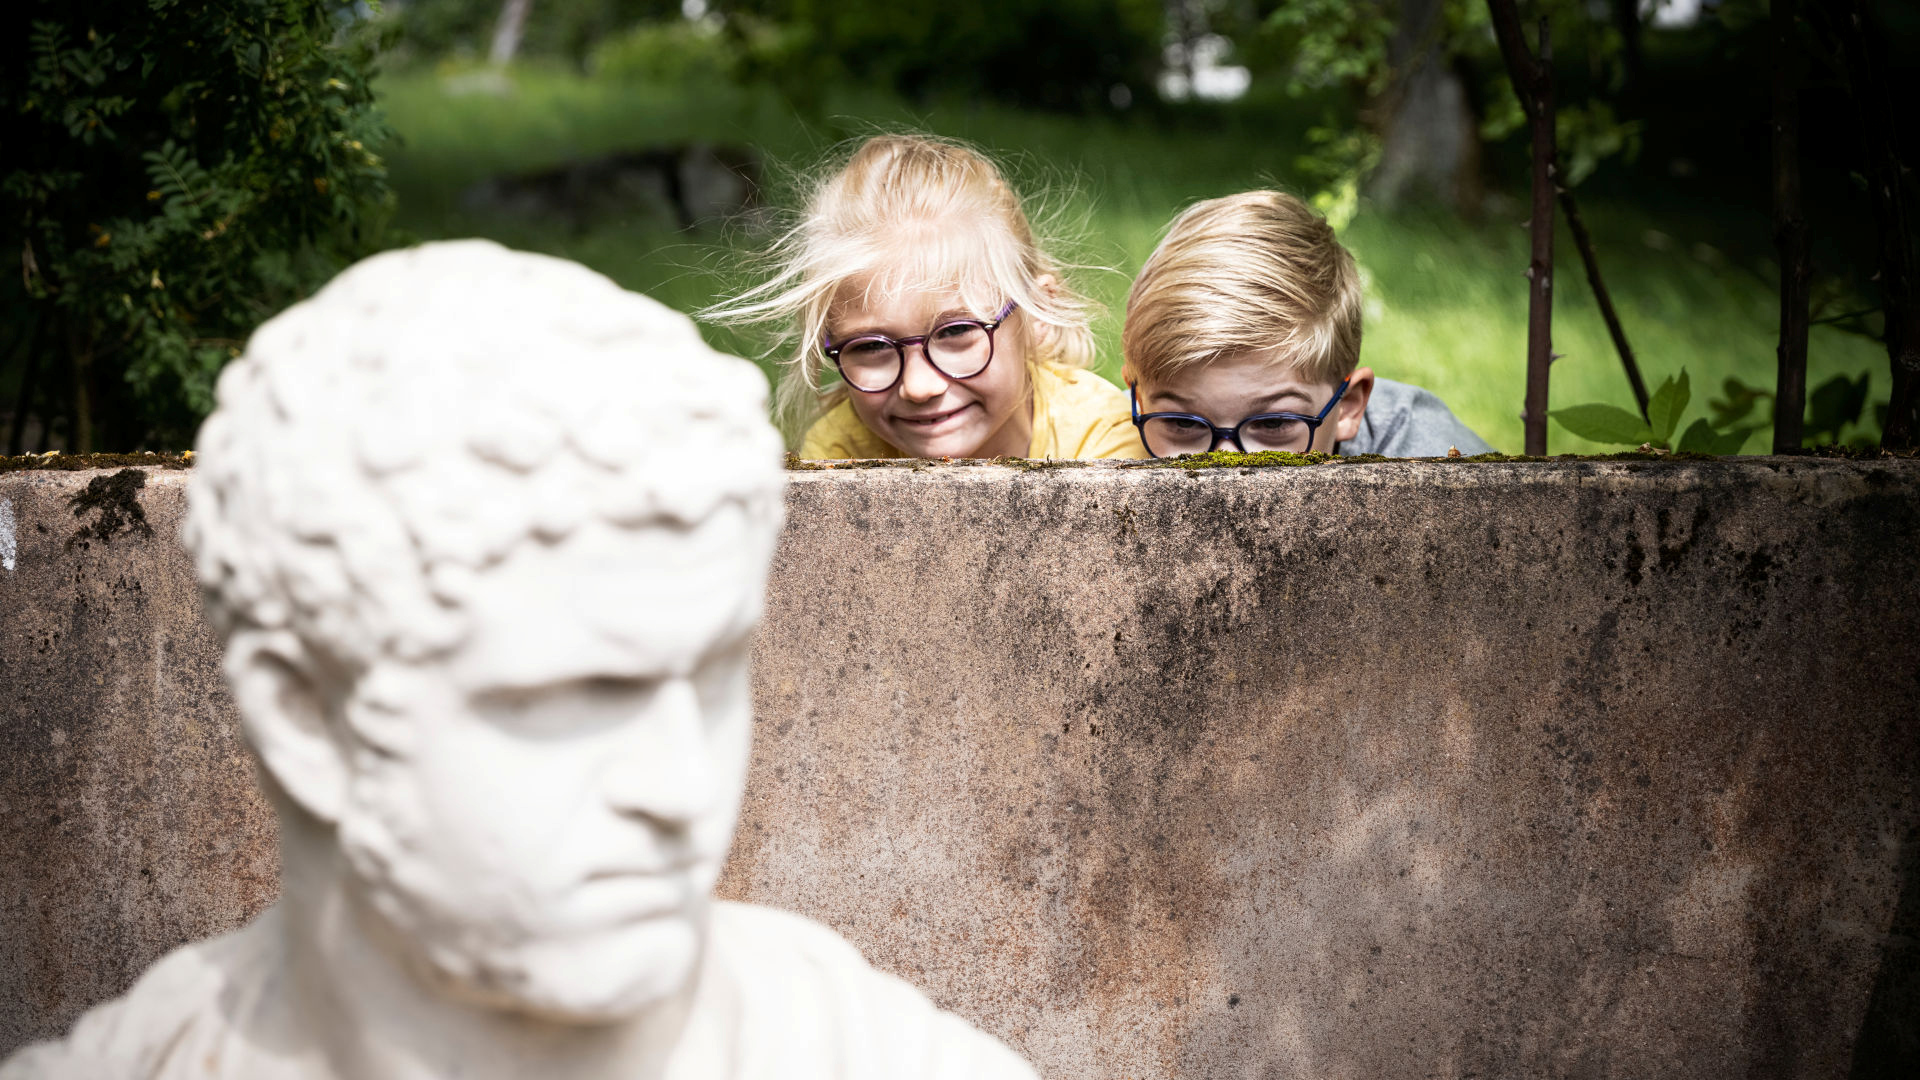 Two children peek out from behind a wall to look at a white statue.